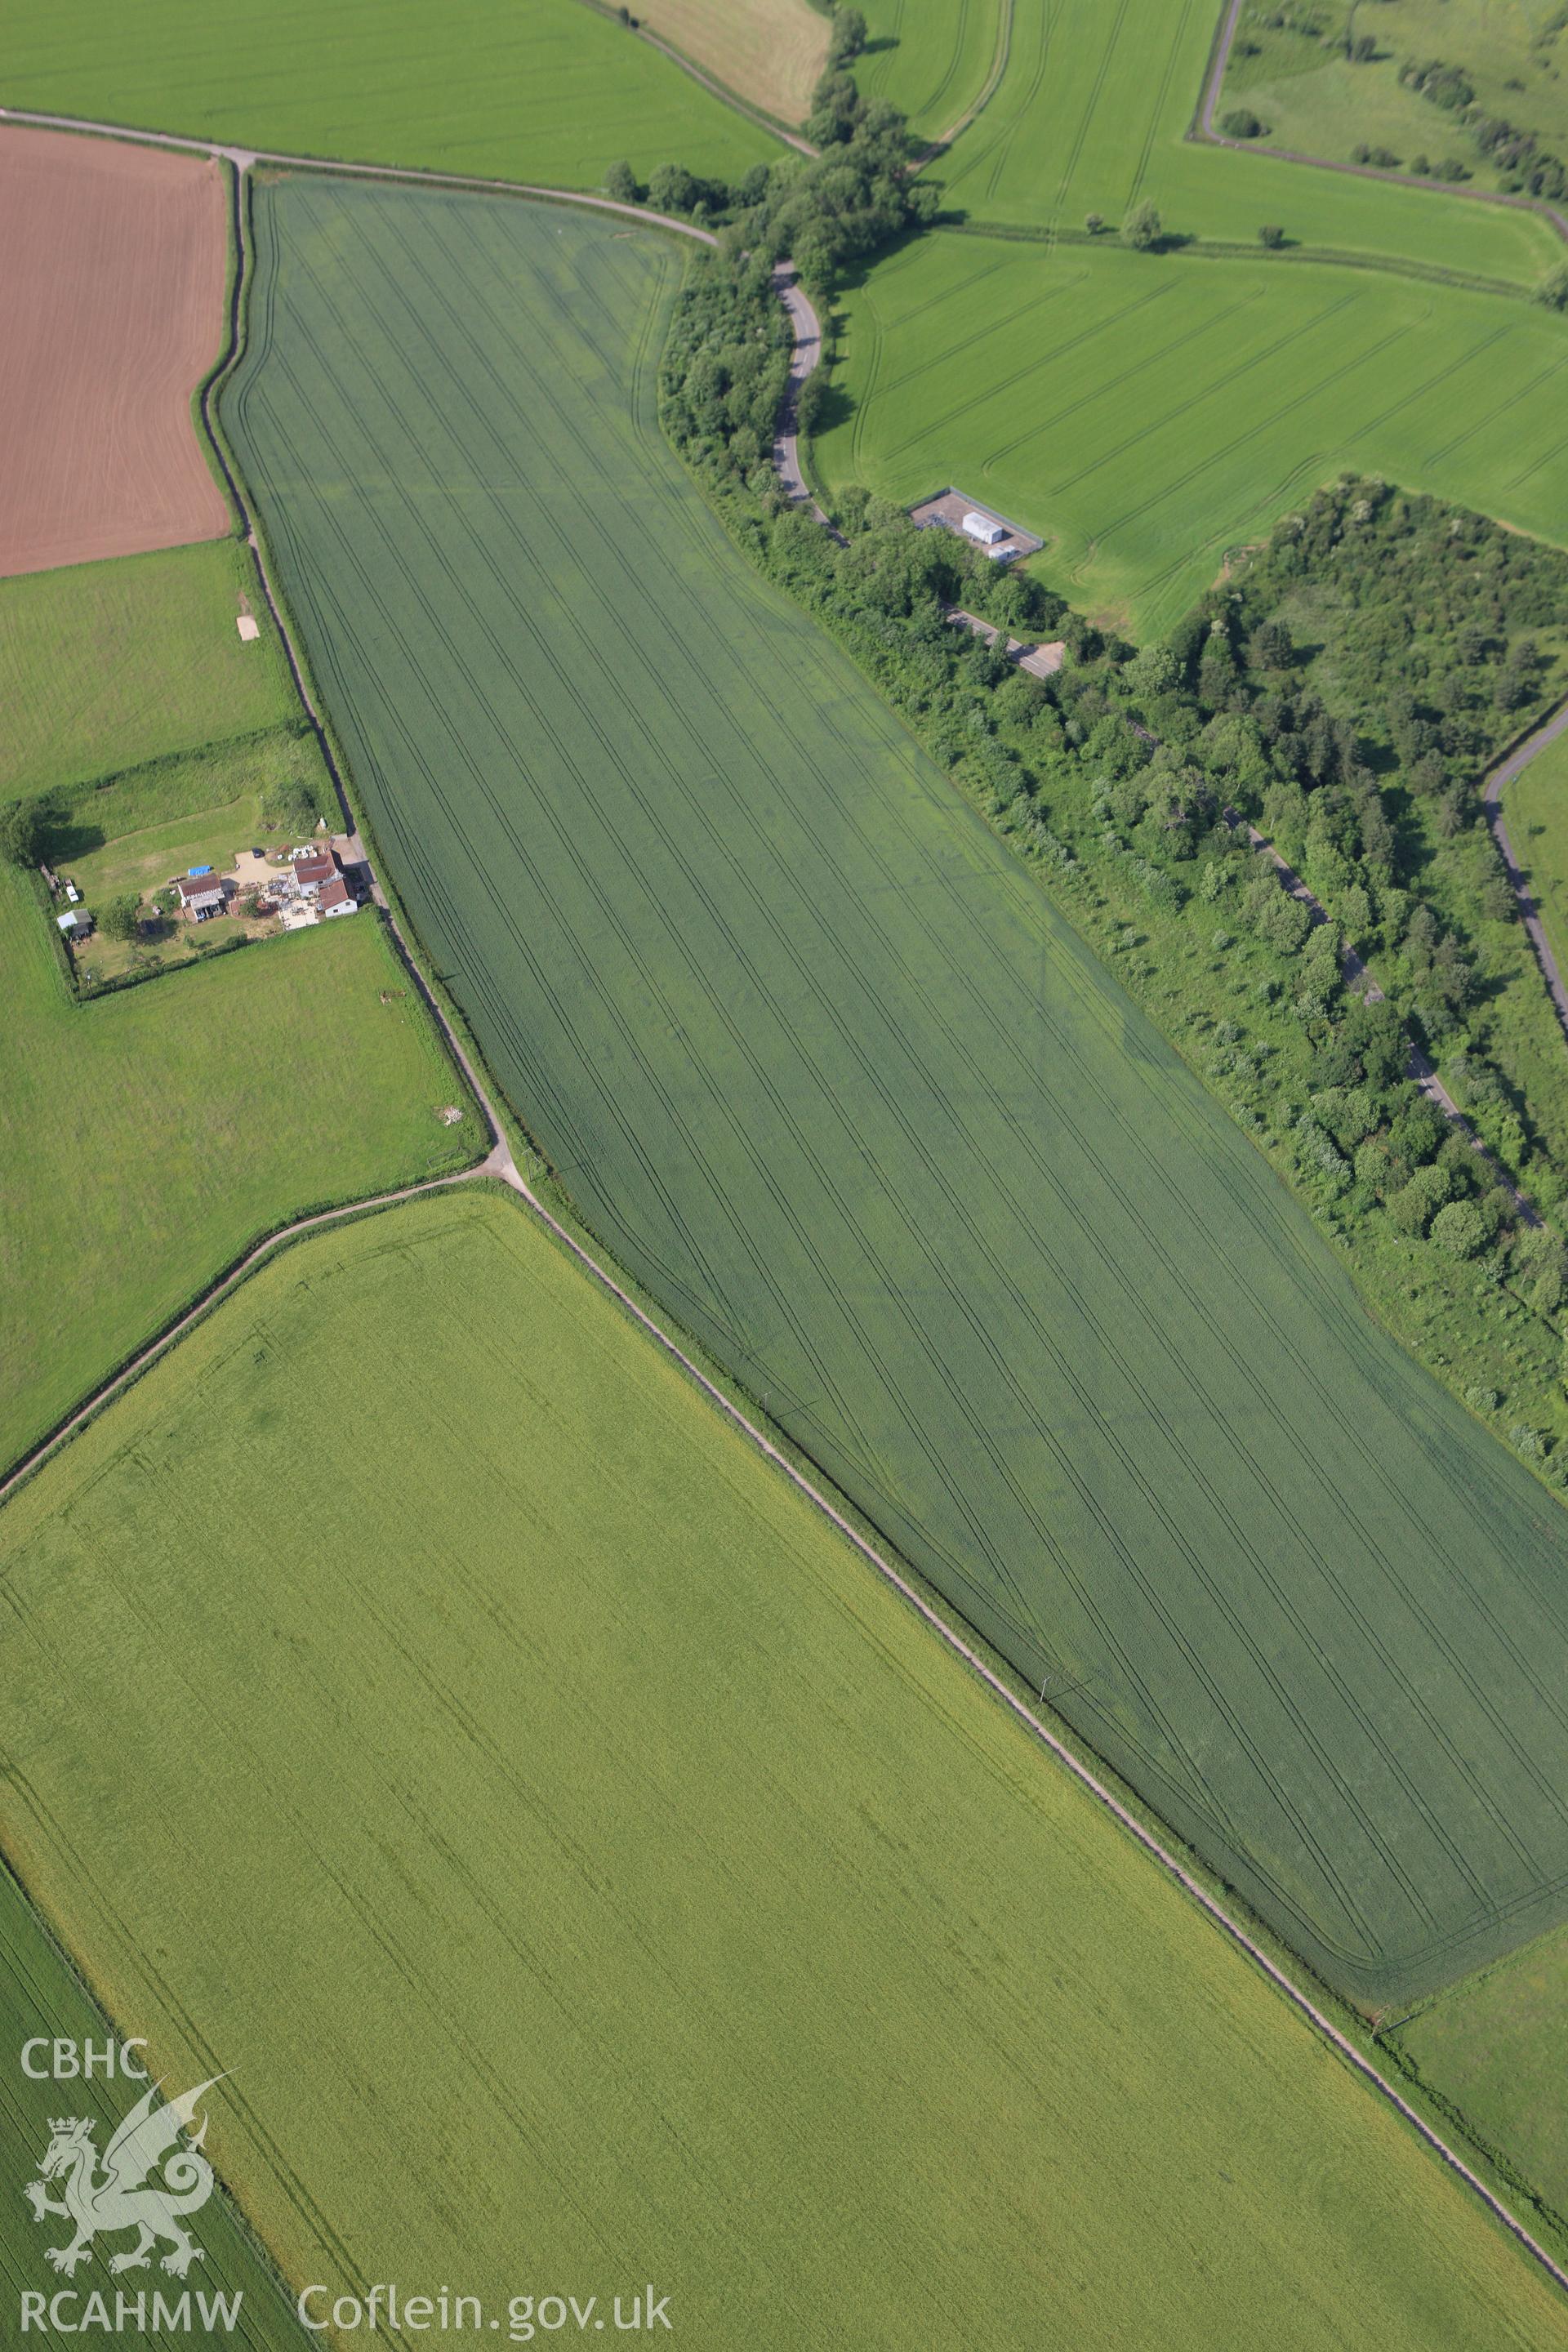 RCAHMW colour oblique aerial photograph of Trewen enclosure complex and ancient field system. Taken on 11 June 2009 by Toby Driver